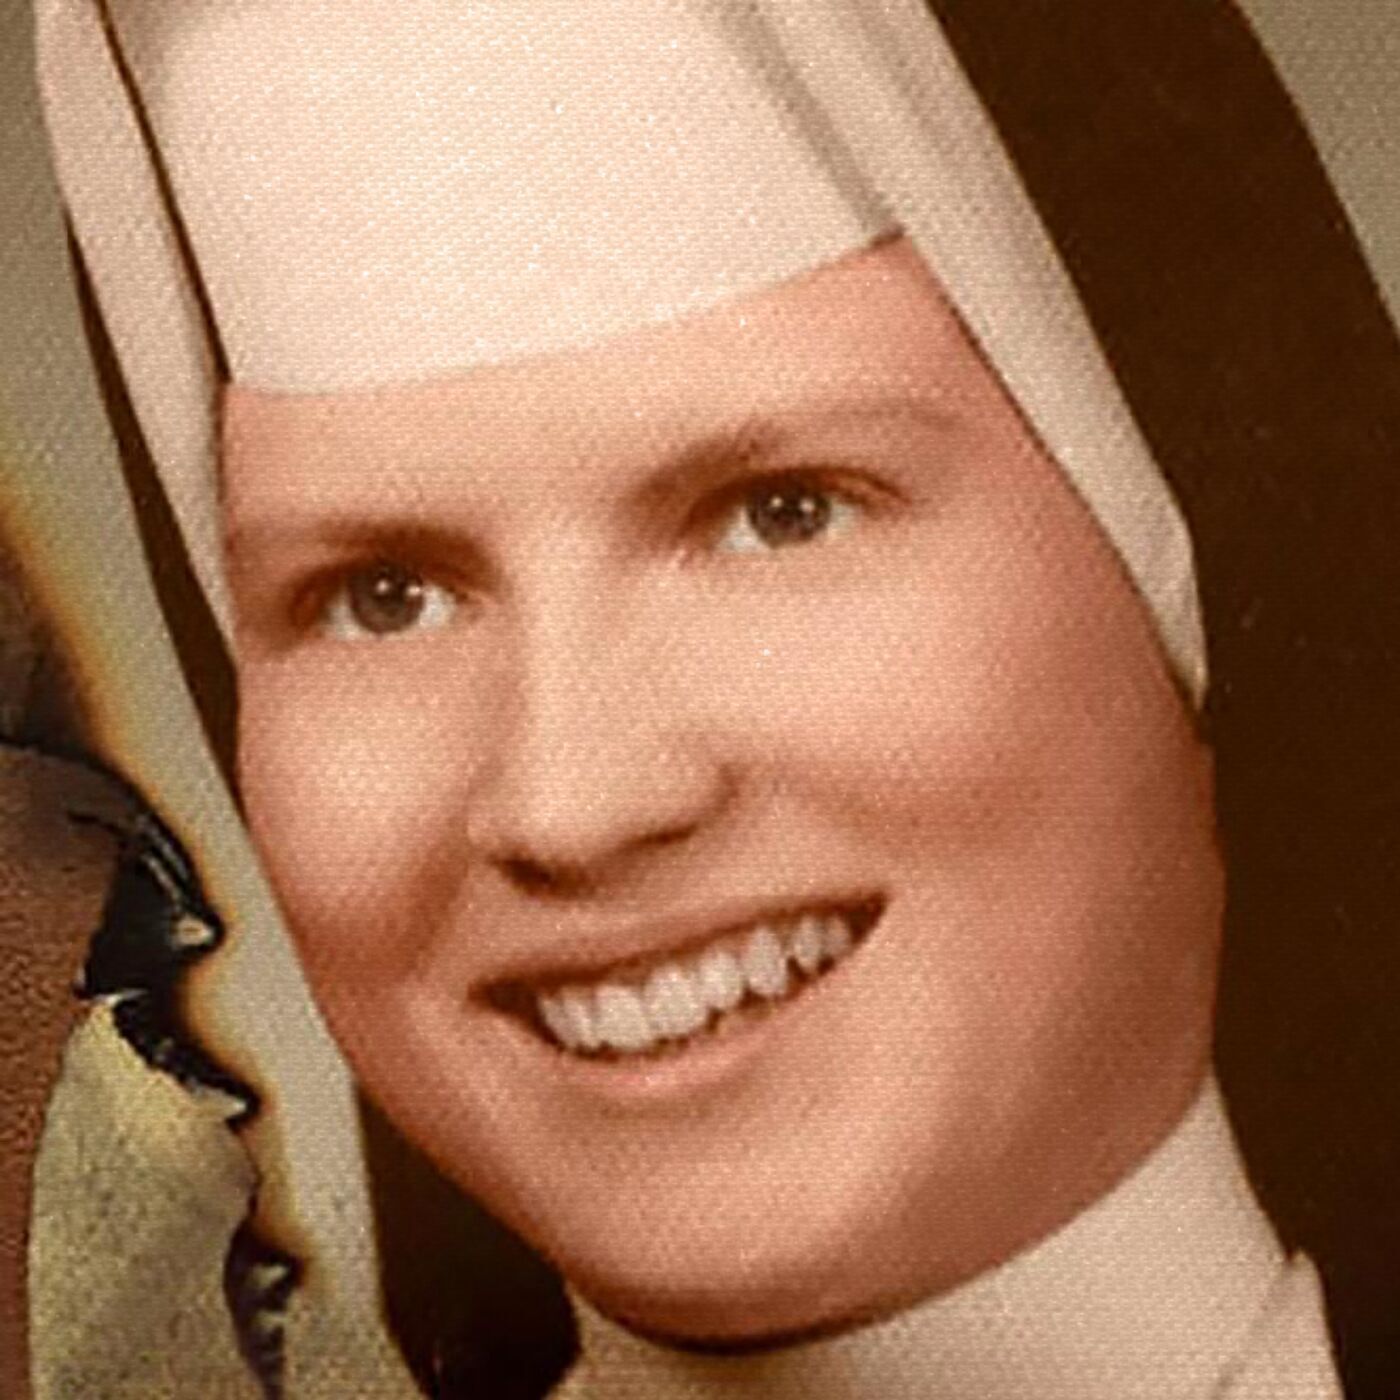 S2 Ep32: Sister Cathy, The Mystery of the Evidence Box, Part 1